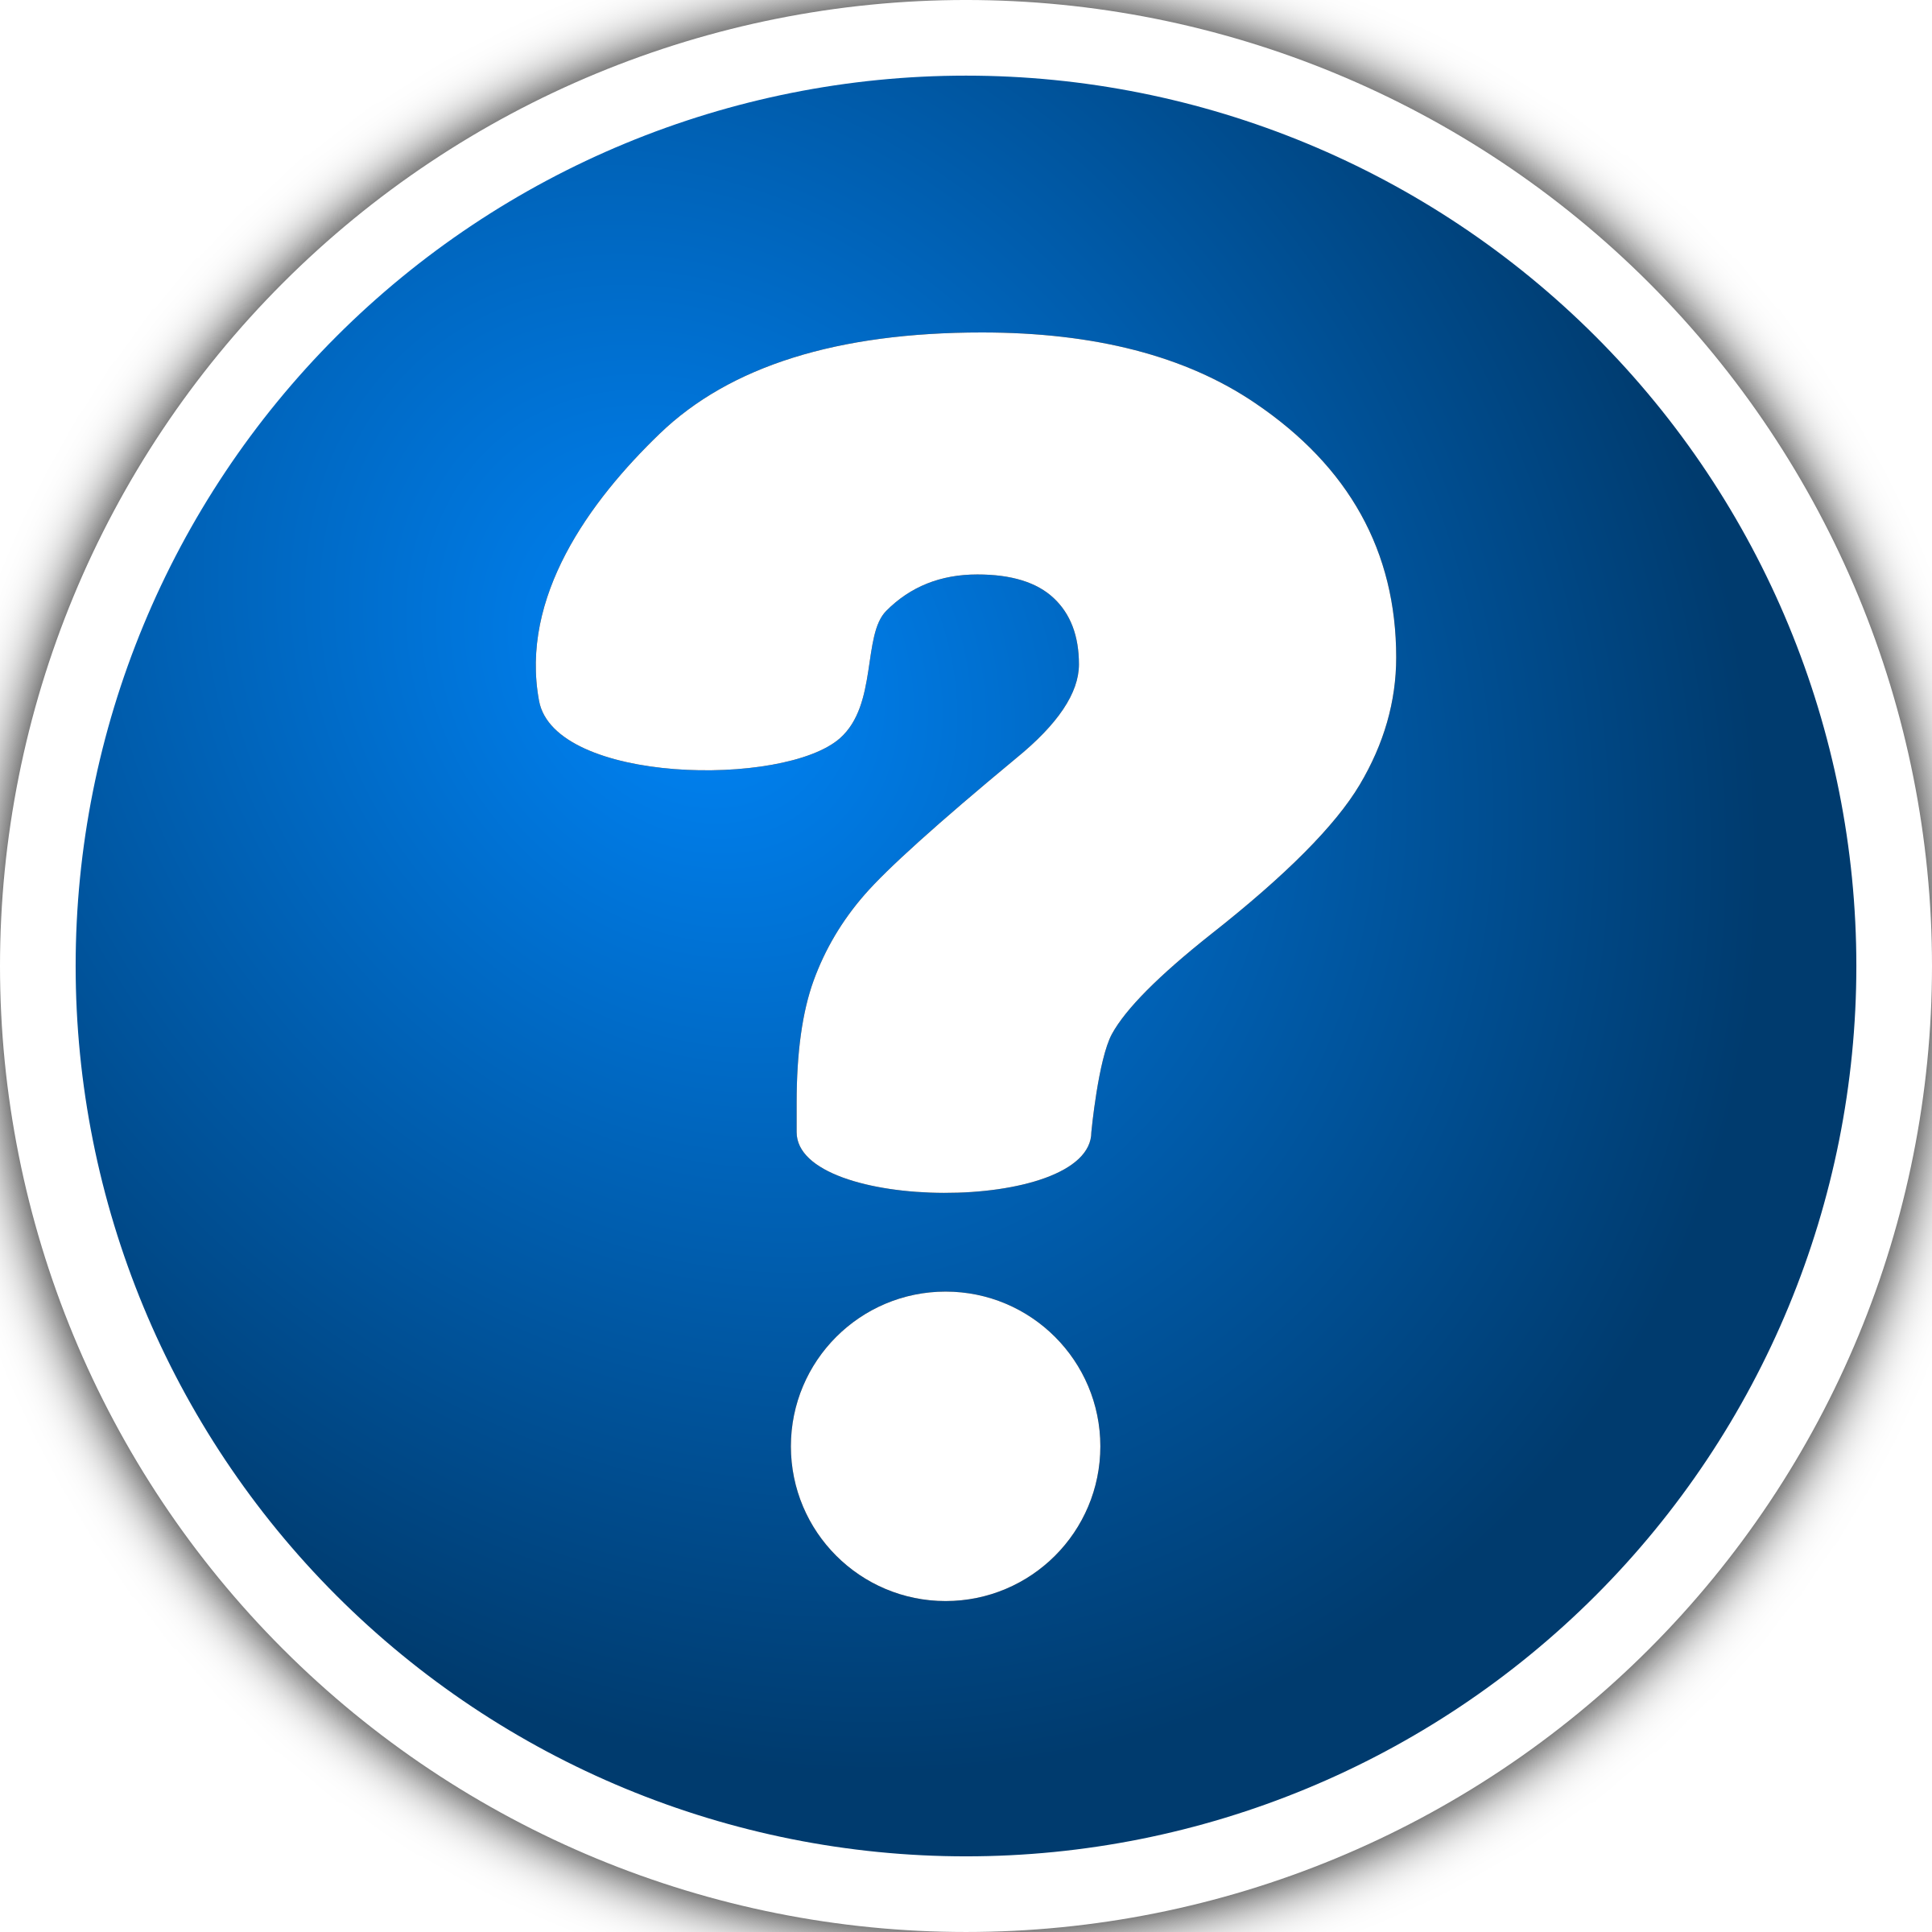 question sign clipart - photo #27